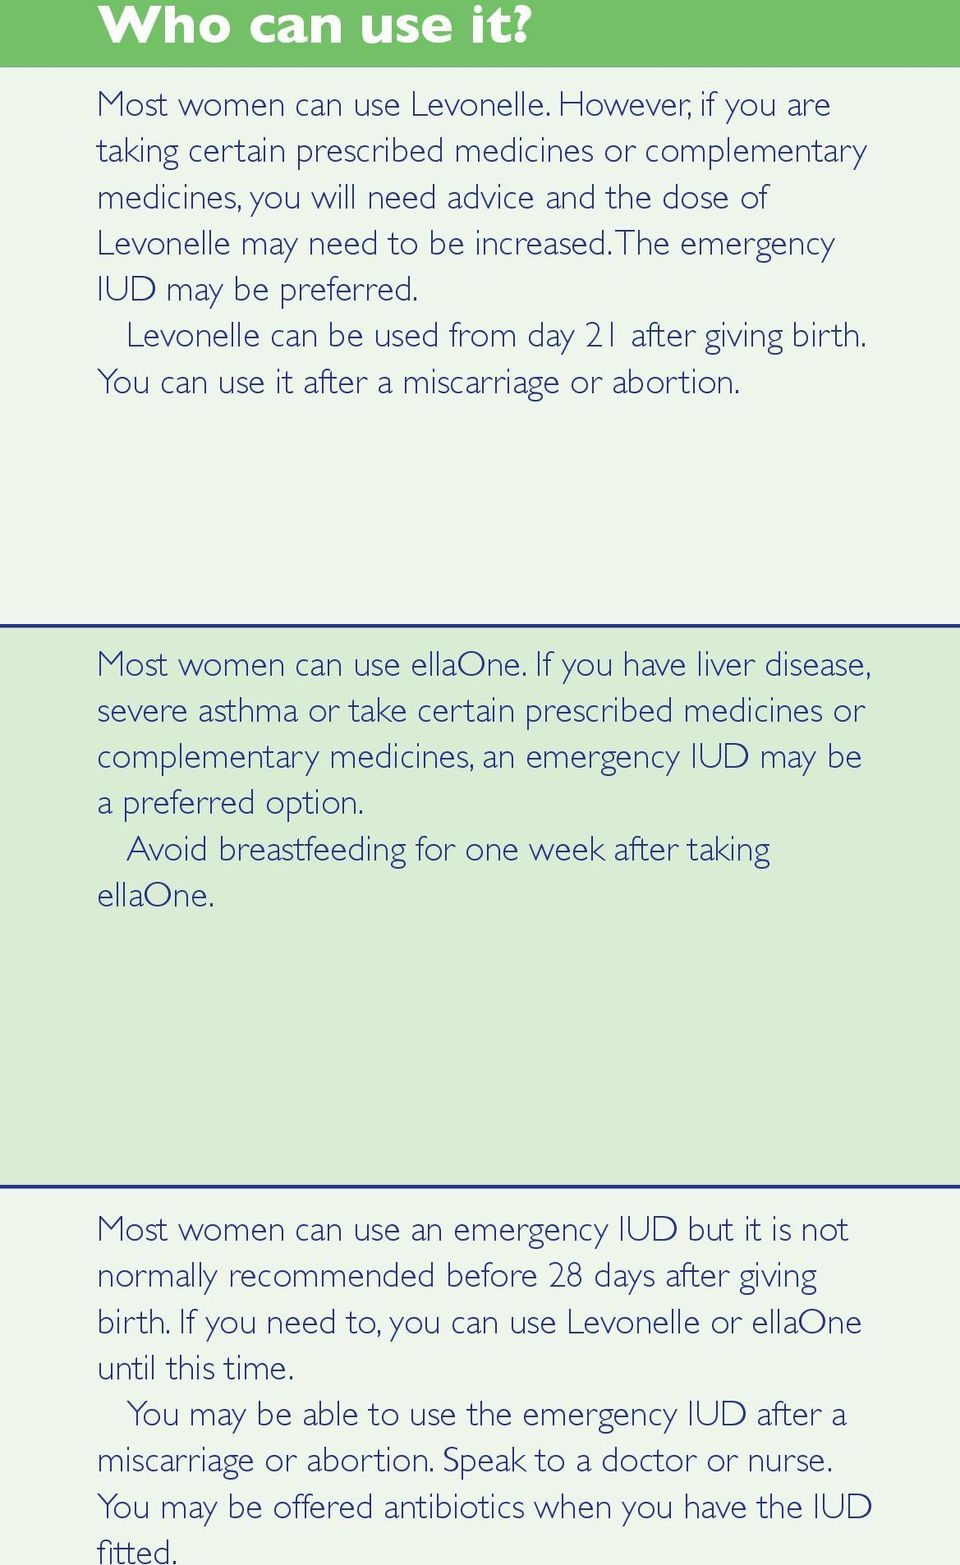 Levonelle can be used from day 21 after giving birth. You can use it after a miscarriage or abortion. Most women can use ellaone.